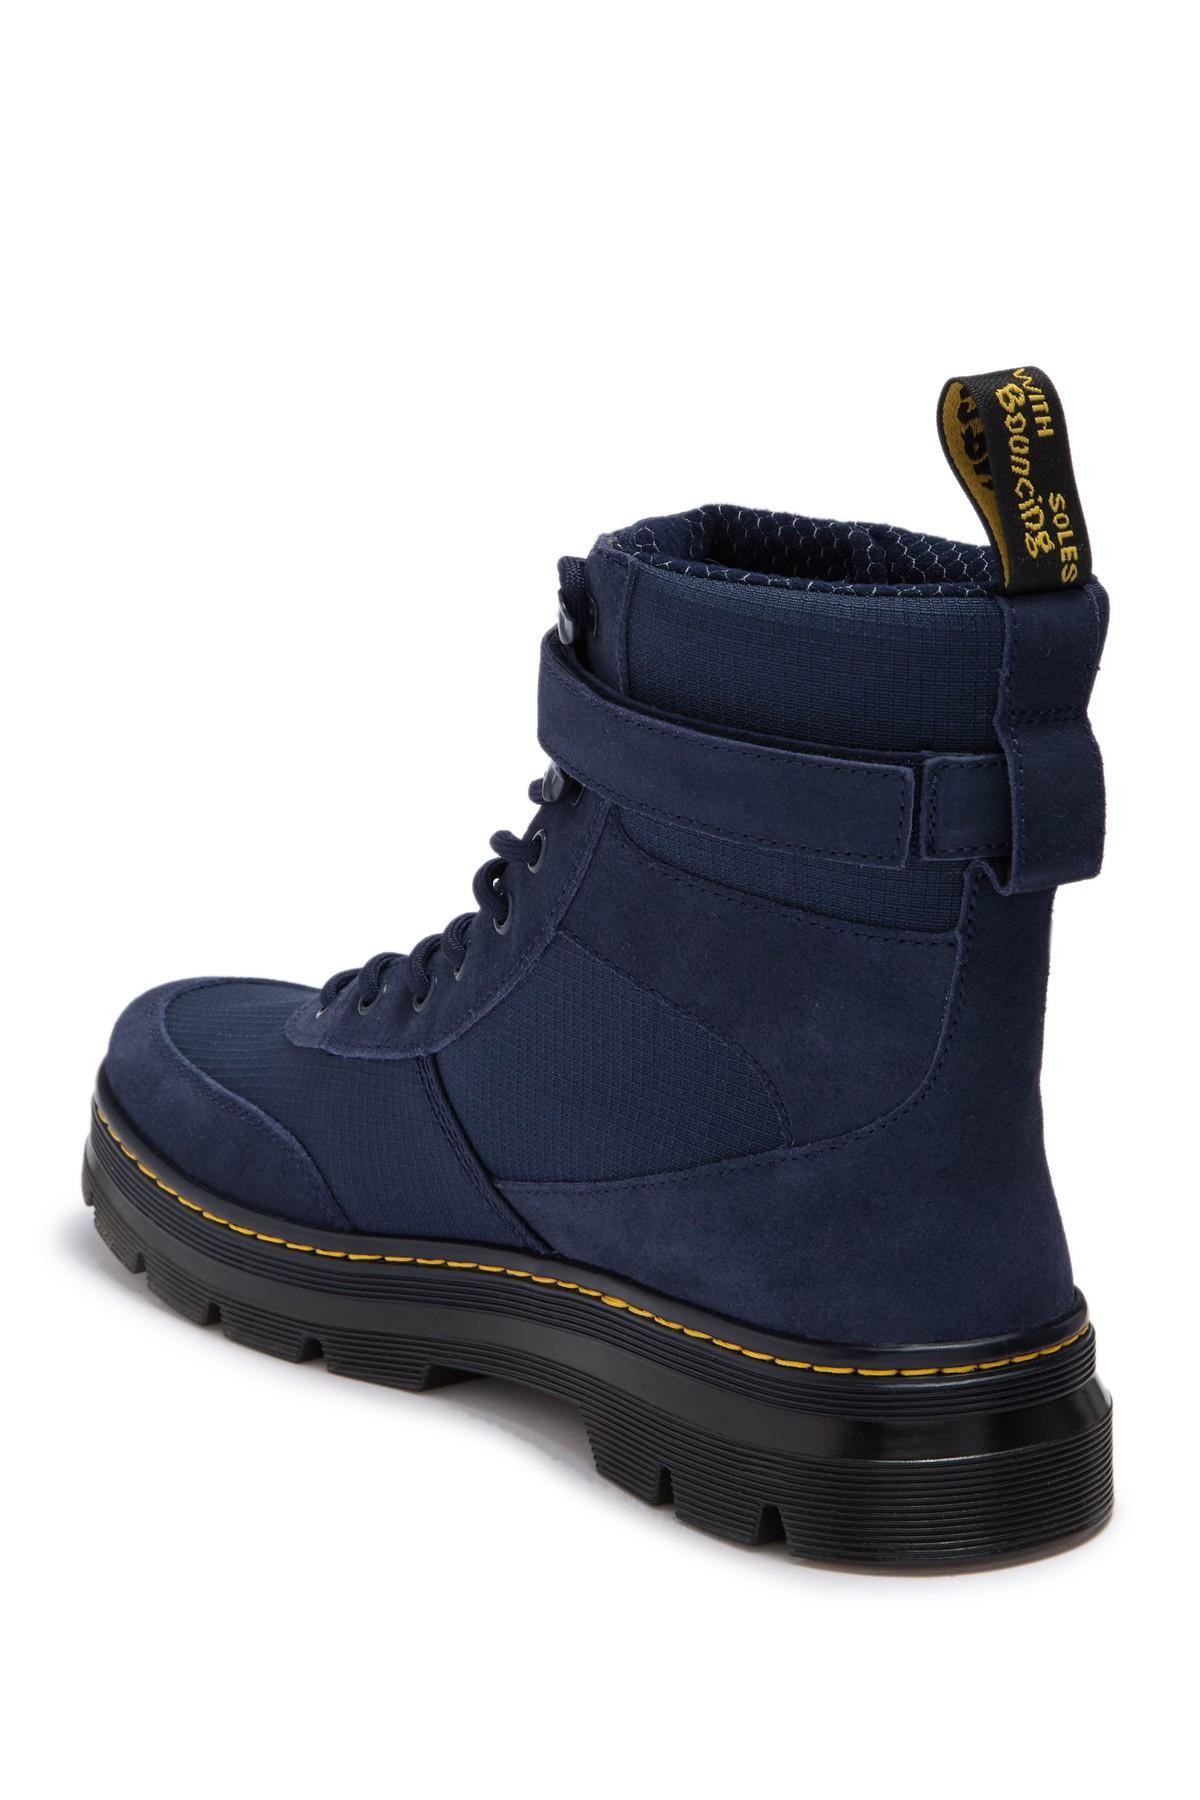 Dr. Martens Synthetic Combs Tech Waterproof Nylon & Leather Boot in Blue  for Men - Lyst